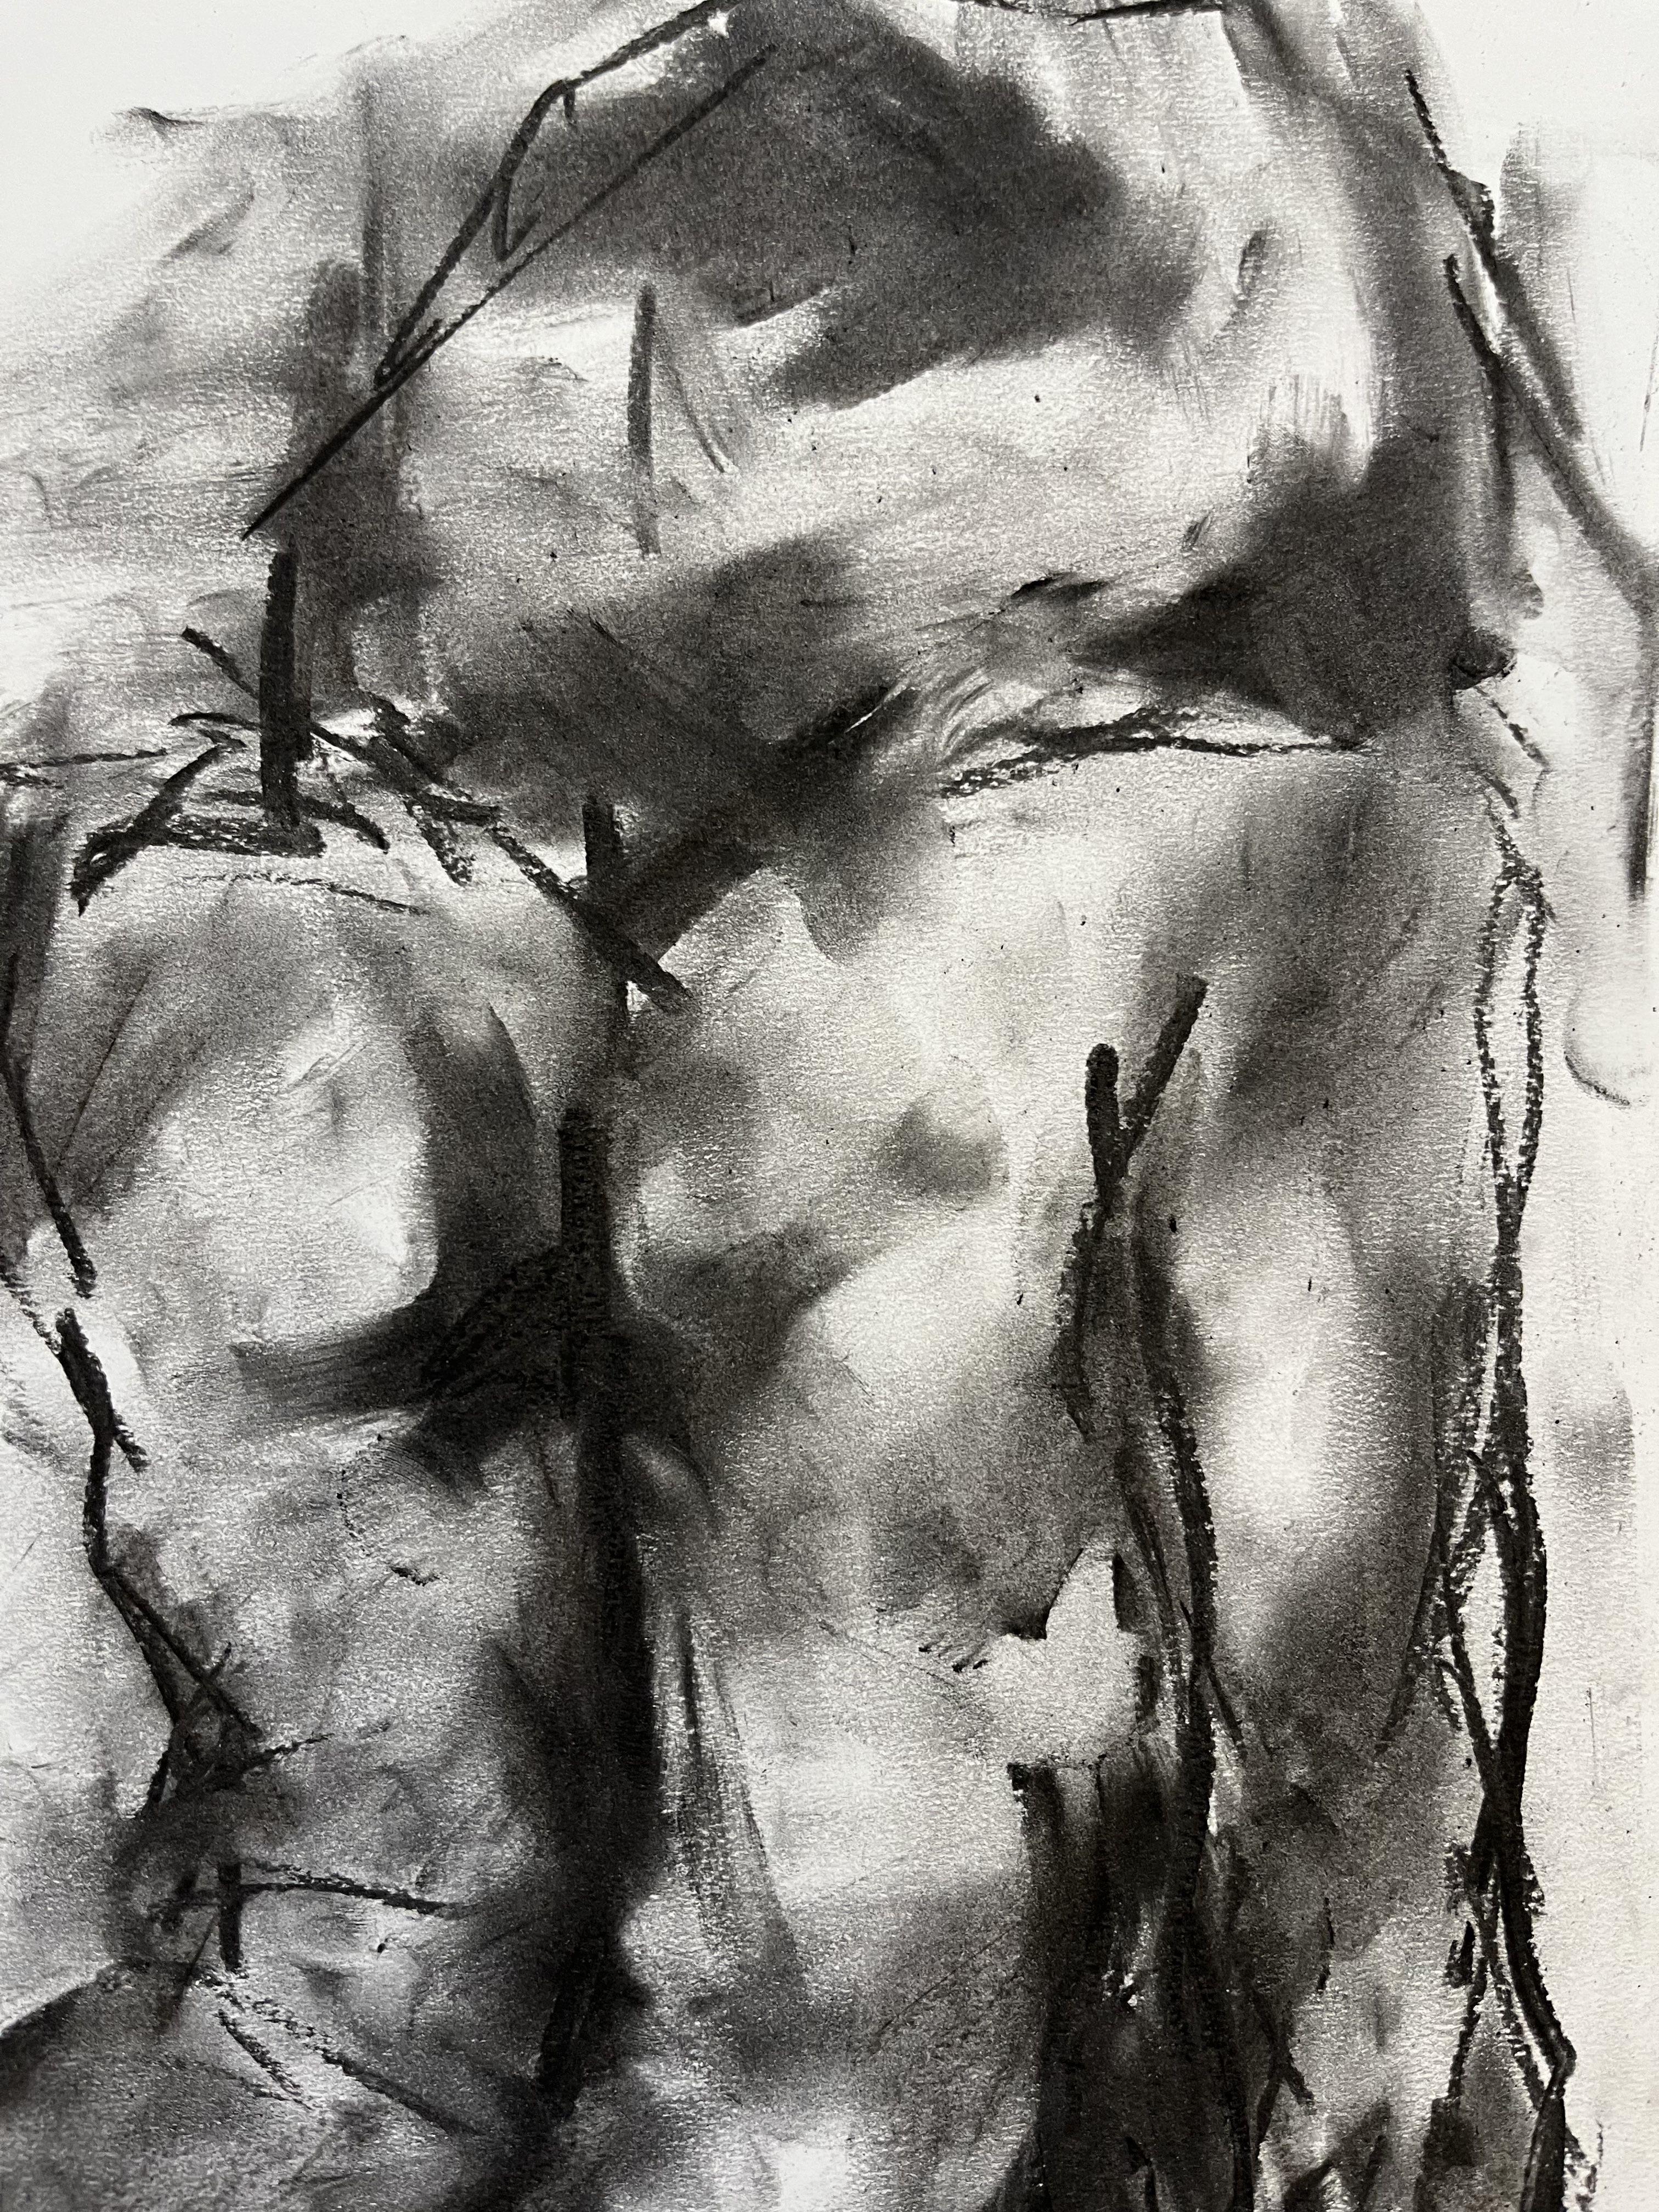 Situation, Drawing, Charcoal on Paper - Impressionist Art by James Shipton